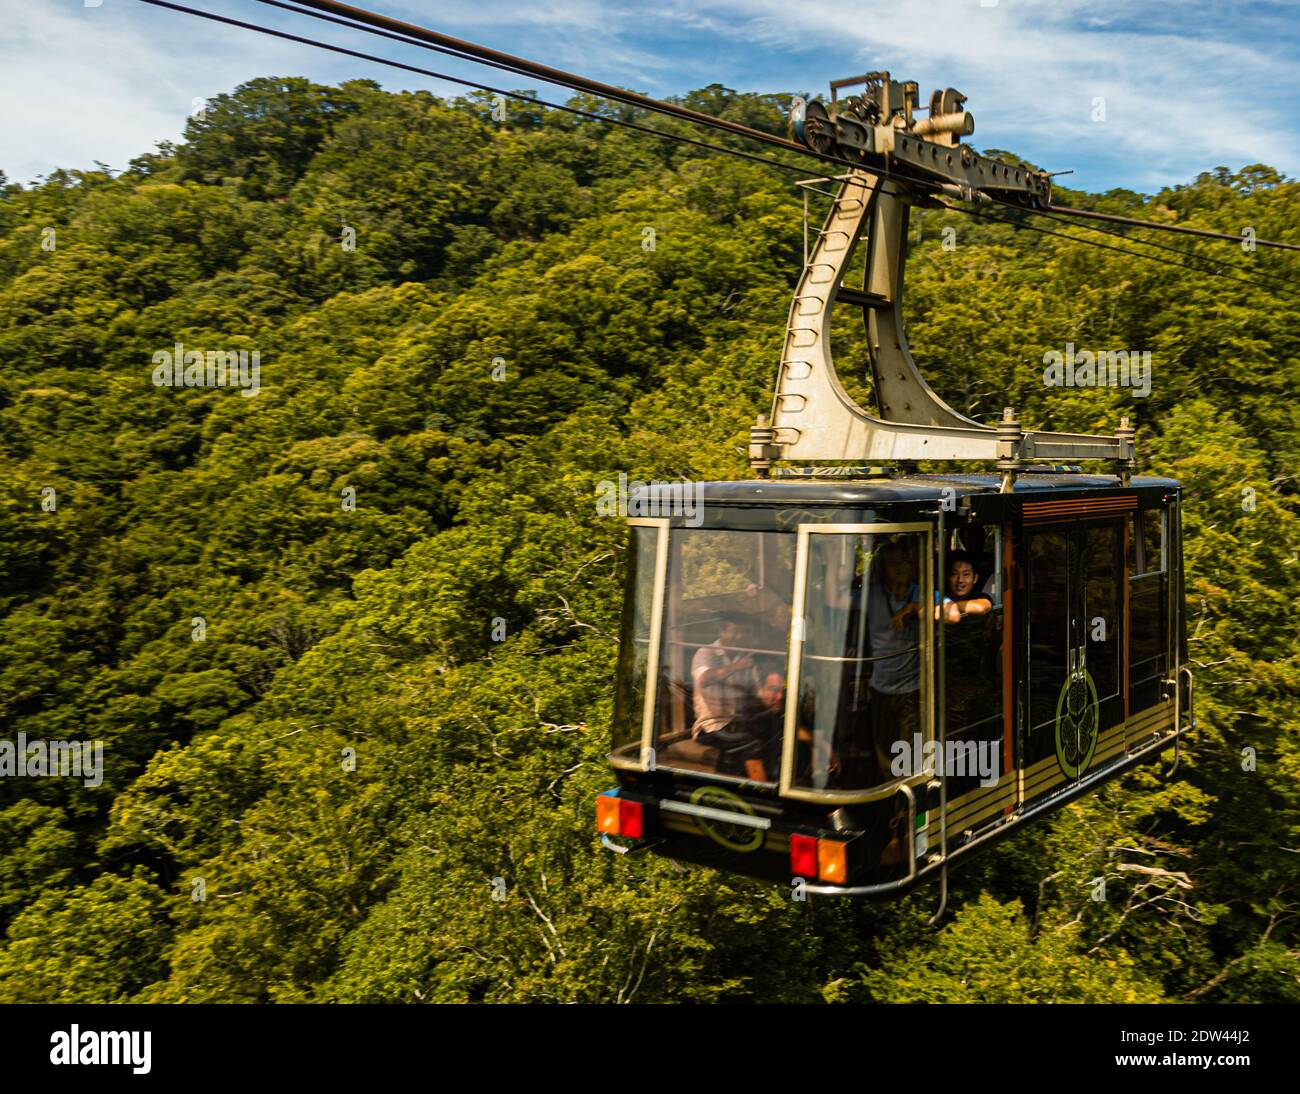 Cable car to Kunozan Toshogu Ticket in Shizuoka, Japan. The Nihondaira Ropeway, which connects Mount Nihondaira and Mount Kunozan. Stock Photo